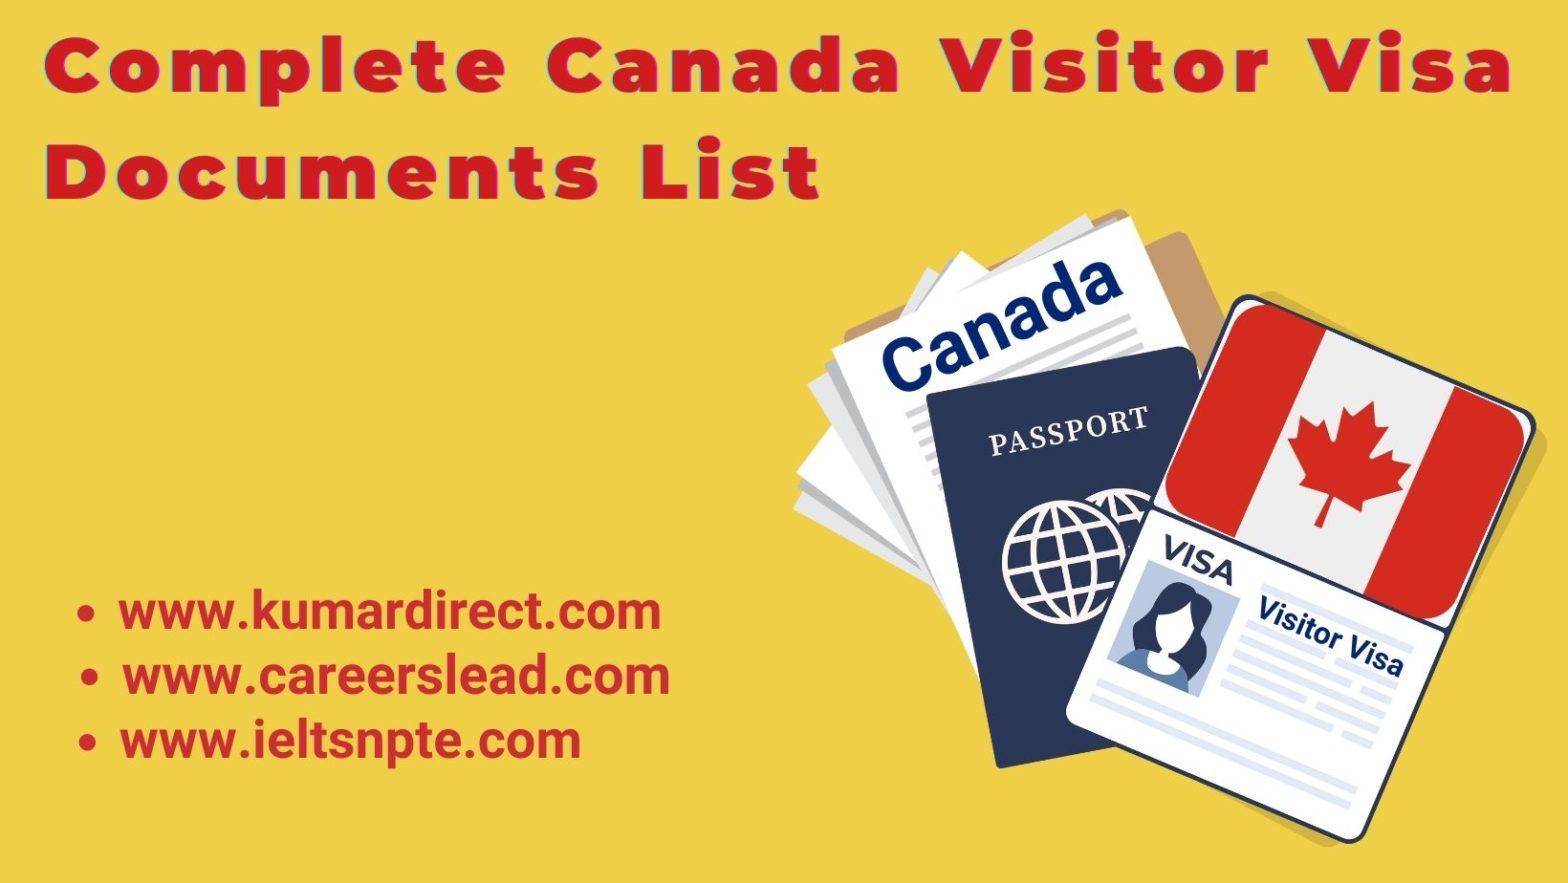 Complete Canada Visitor Visa Documents List